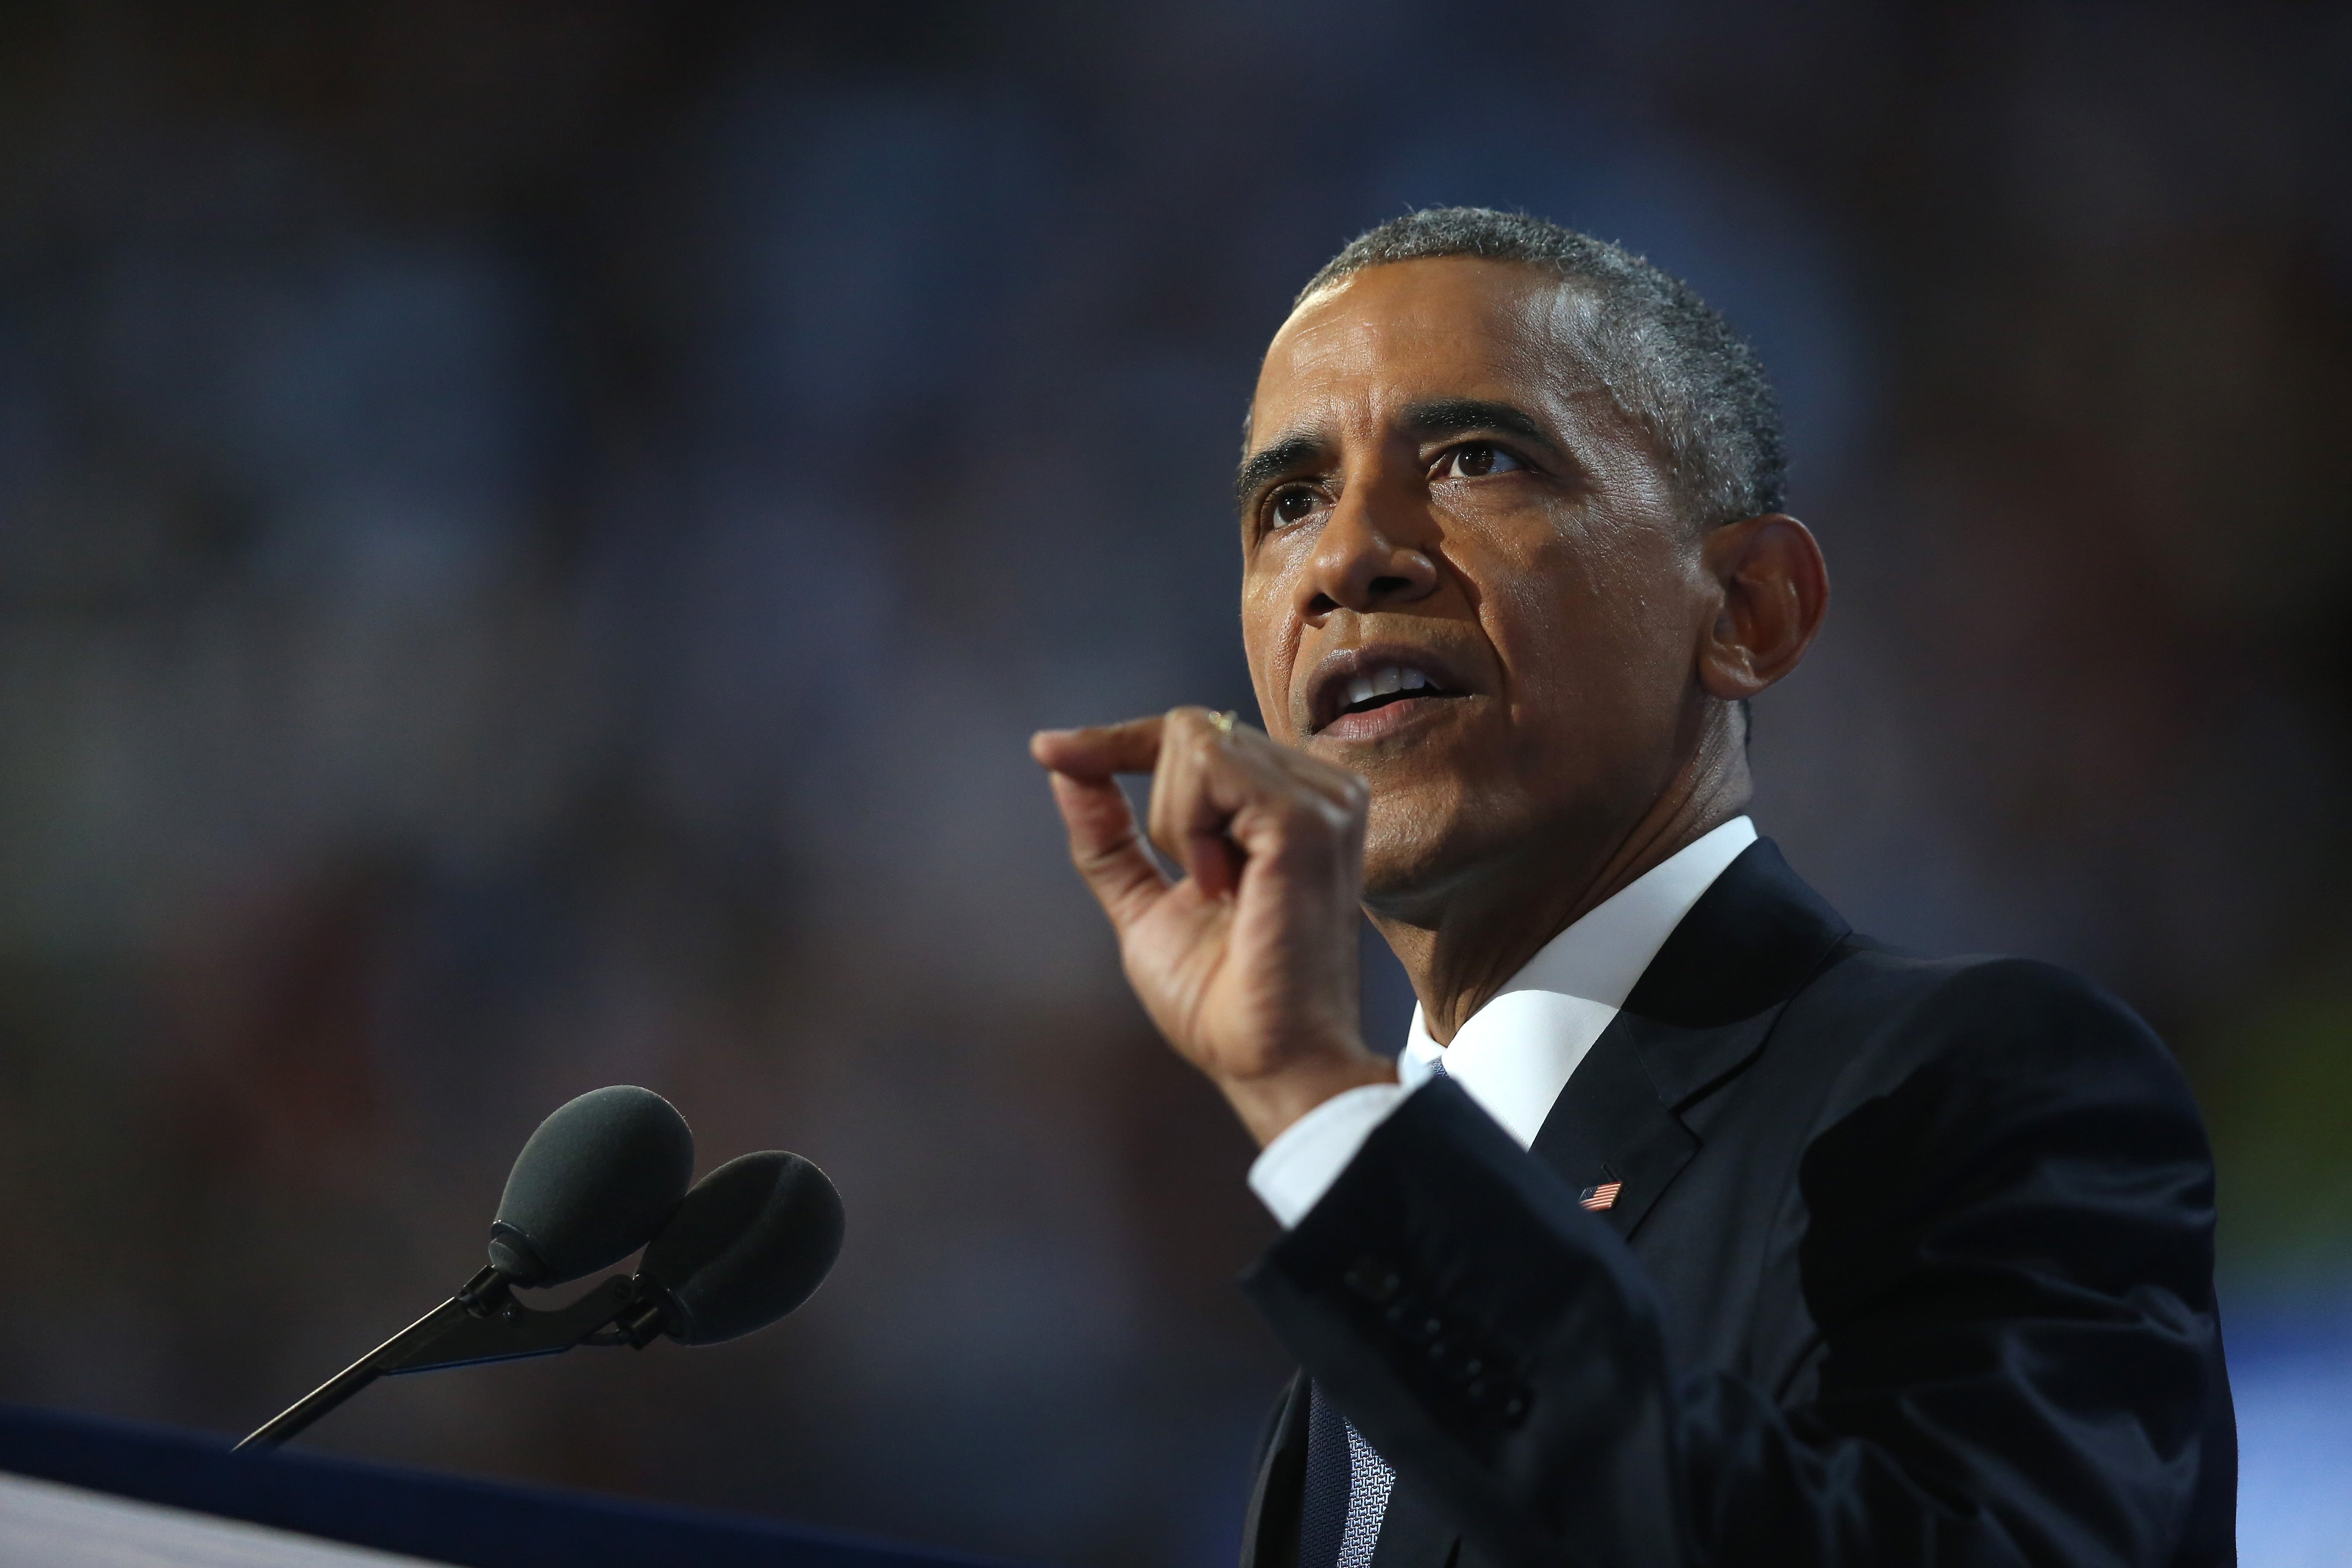 President Obama Reauthorizes Emmett Till Act To Reopen Unsolved Civil Rights Cases